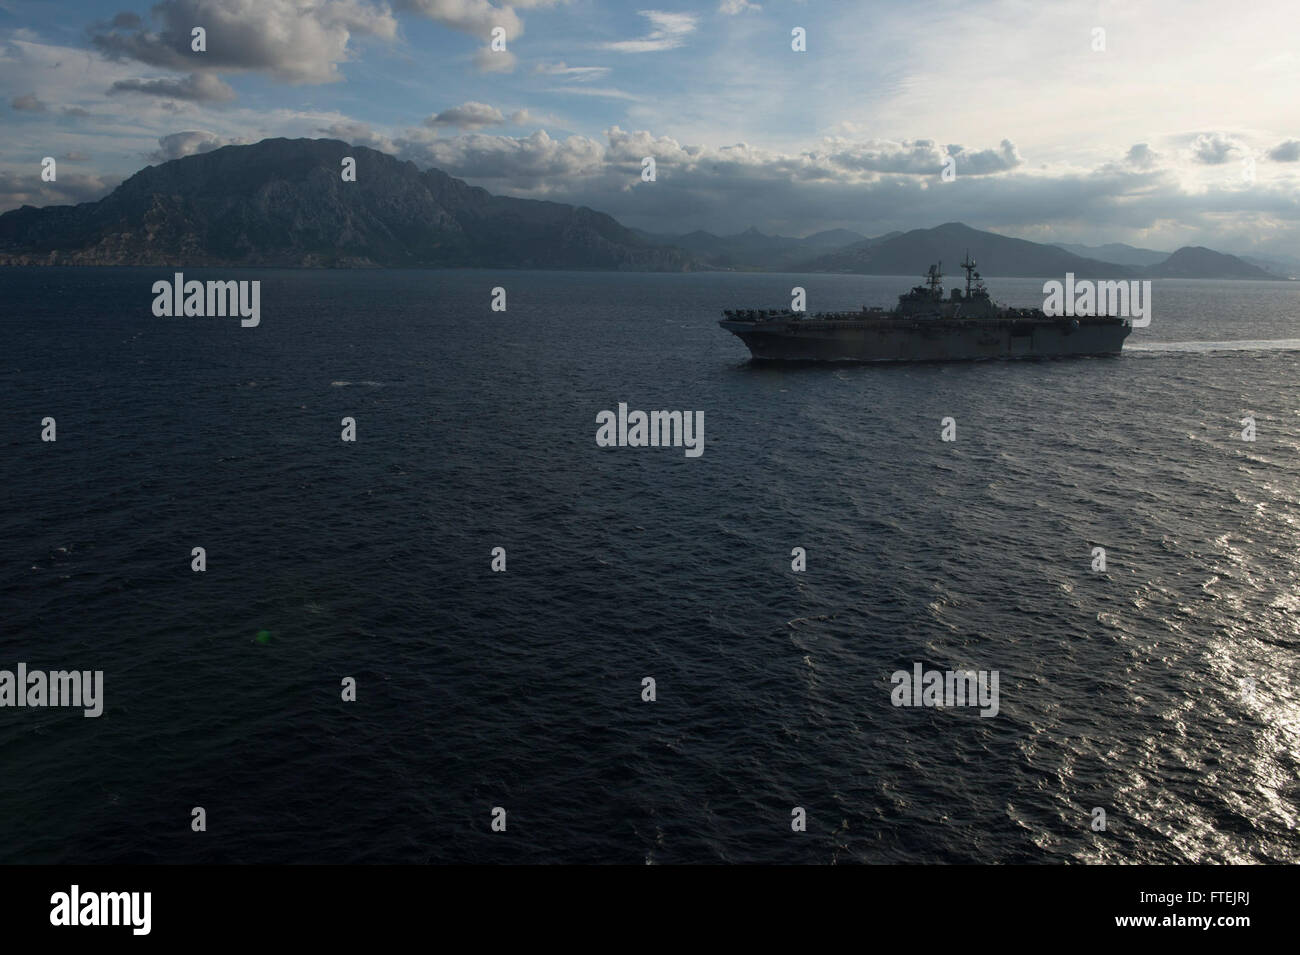 STRAIT OF GIBRALTAR (Dec. 27, 2014) Amphibious assault ship USS Iwo Jima (LHD 7) conducts an eastbound transit of the Strait of Gibraltar Dec. 27, 2014. Iwo Jima, deployed as part of the Iwo Jima Amphibious Ready Group/24th Marine Expeditionary Unit (IWO ARG/24 MEU), is conducting naval operations in the U.S. 6th Fleet area of operations in support of U.S. national security interests in Europe. F. Stock Photo